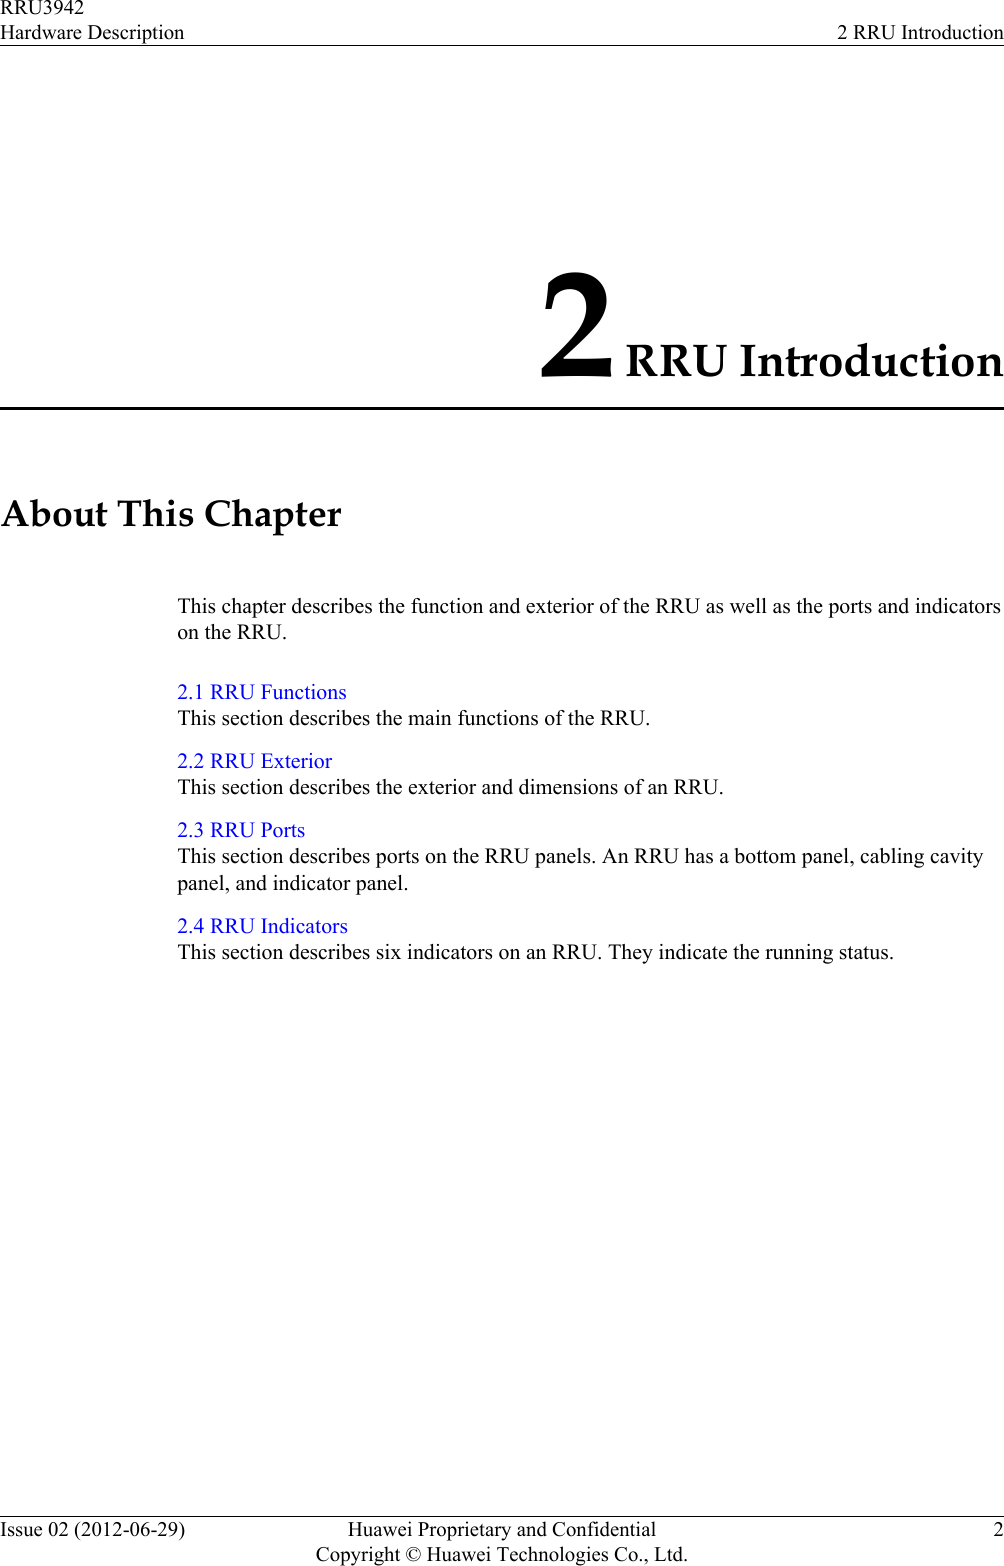 2 RRU IntroductionAbout This ChapterThis chapter describes the function and exterior of the RRU as well as the ports and indicatorson the RRU.2.1 RRU FunctionsThis section describes the main functions of the RRU.2.2 RRU ExteriorThis section describes the exterior and dimensions of an RRU.2.3 RRU PortsThis section describes ports on the RRU panels. An RRU has a bottom panel, cabling cavitypanel, and indicator panel.2.4 RRU IndicatorsThis section describes six indicators on an RRU. They indicate the running status.RRU3942Hardware Description 2 RRU IntroductionIssue 02 (2012-06-29) Huawei Proprietary and ConfidentialCopyright © Huawei Technologies Co., Ltd.2